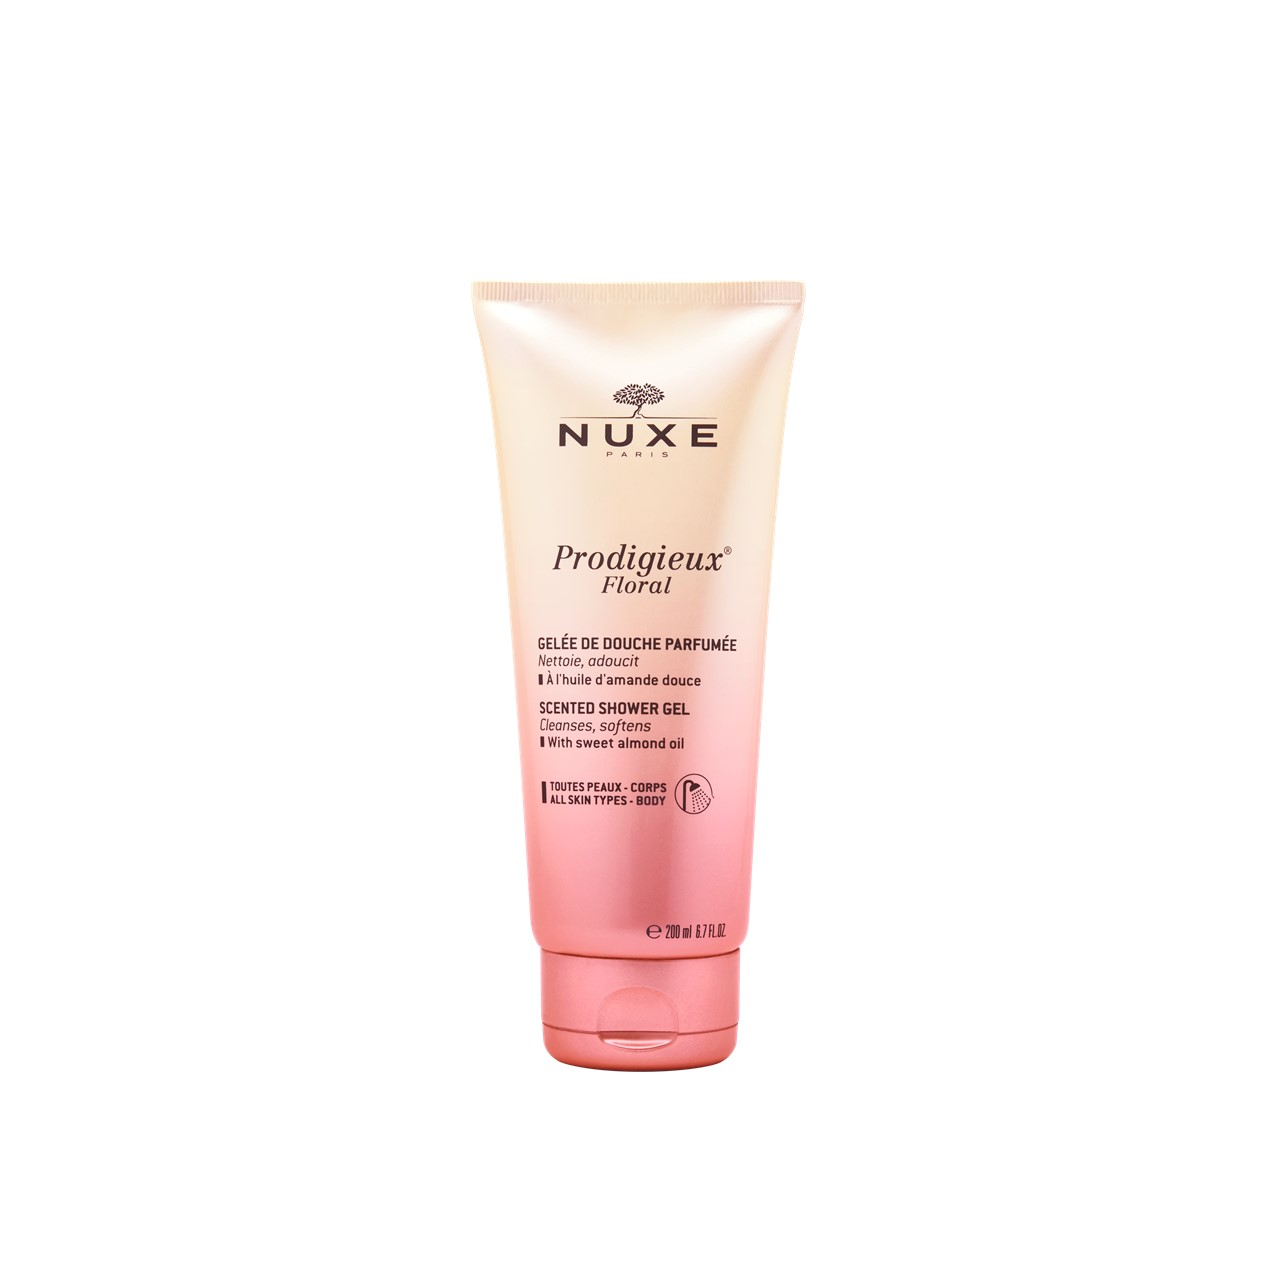 NUXE Prodigieux Floral Scented Shower Gel 200ml